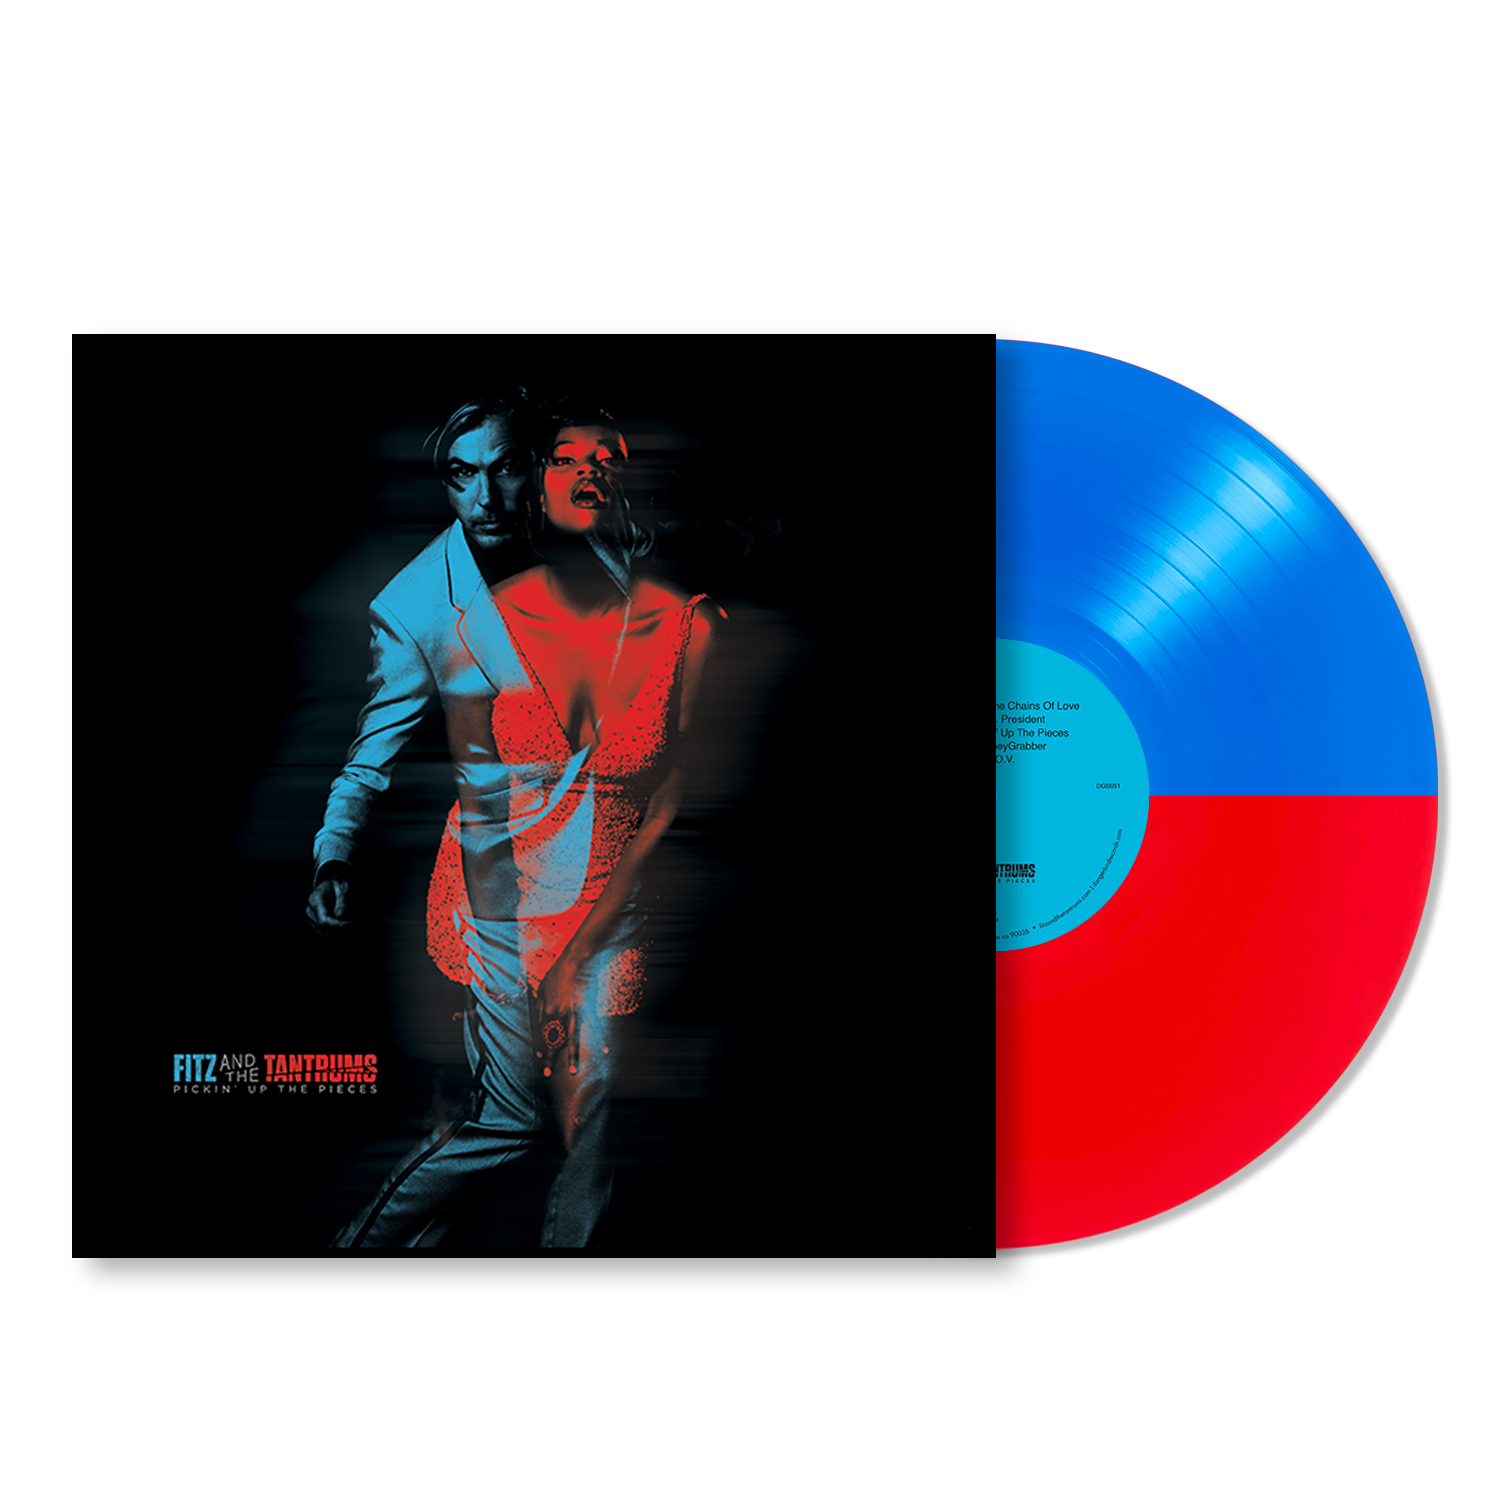 [DAMAGED] Fitz and the Tantrums - Pickin' Up The Pieces [Red & Blue Vinyl]